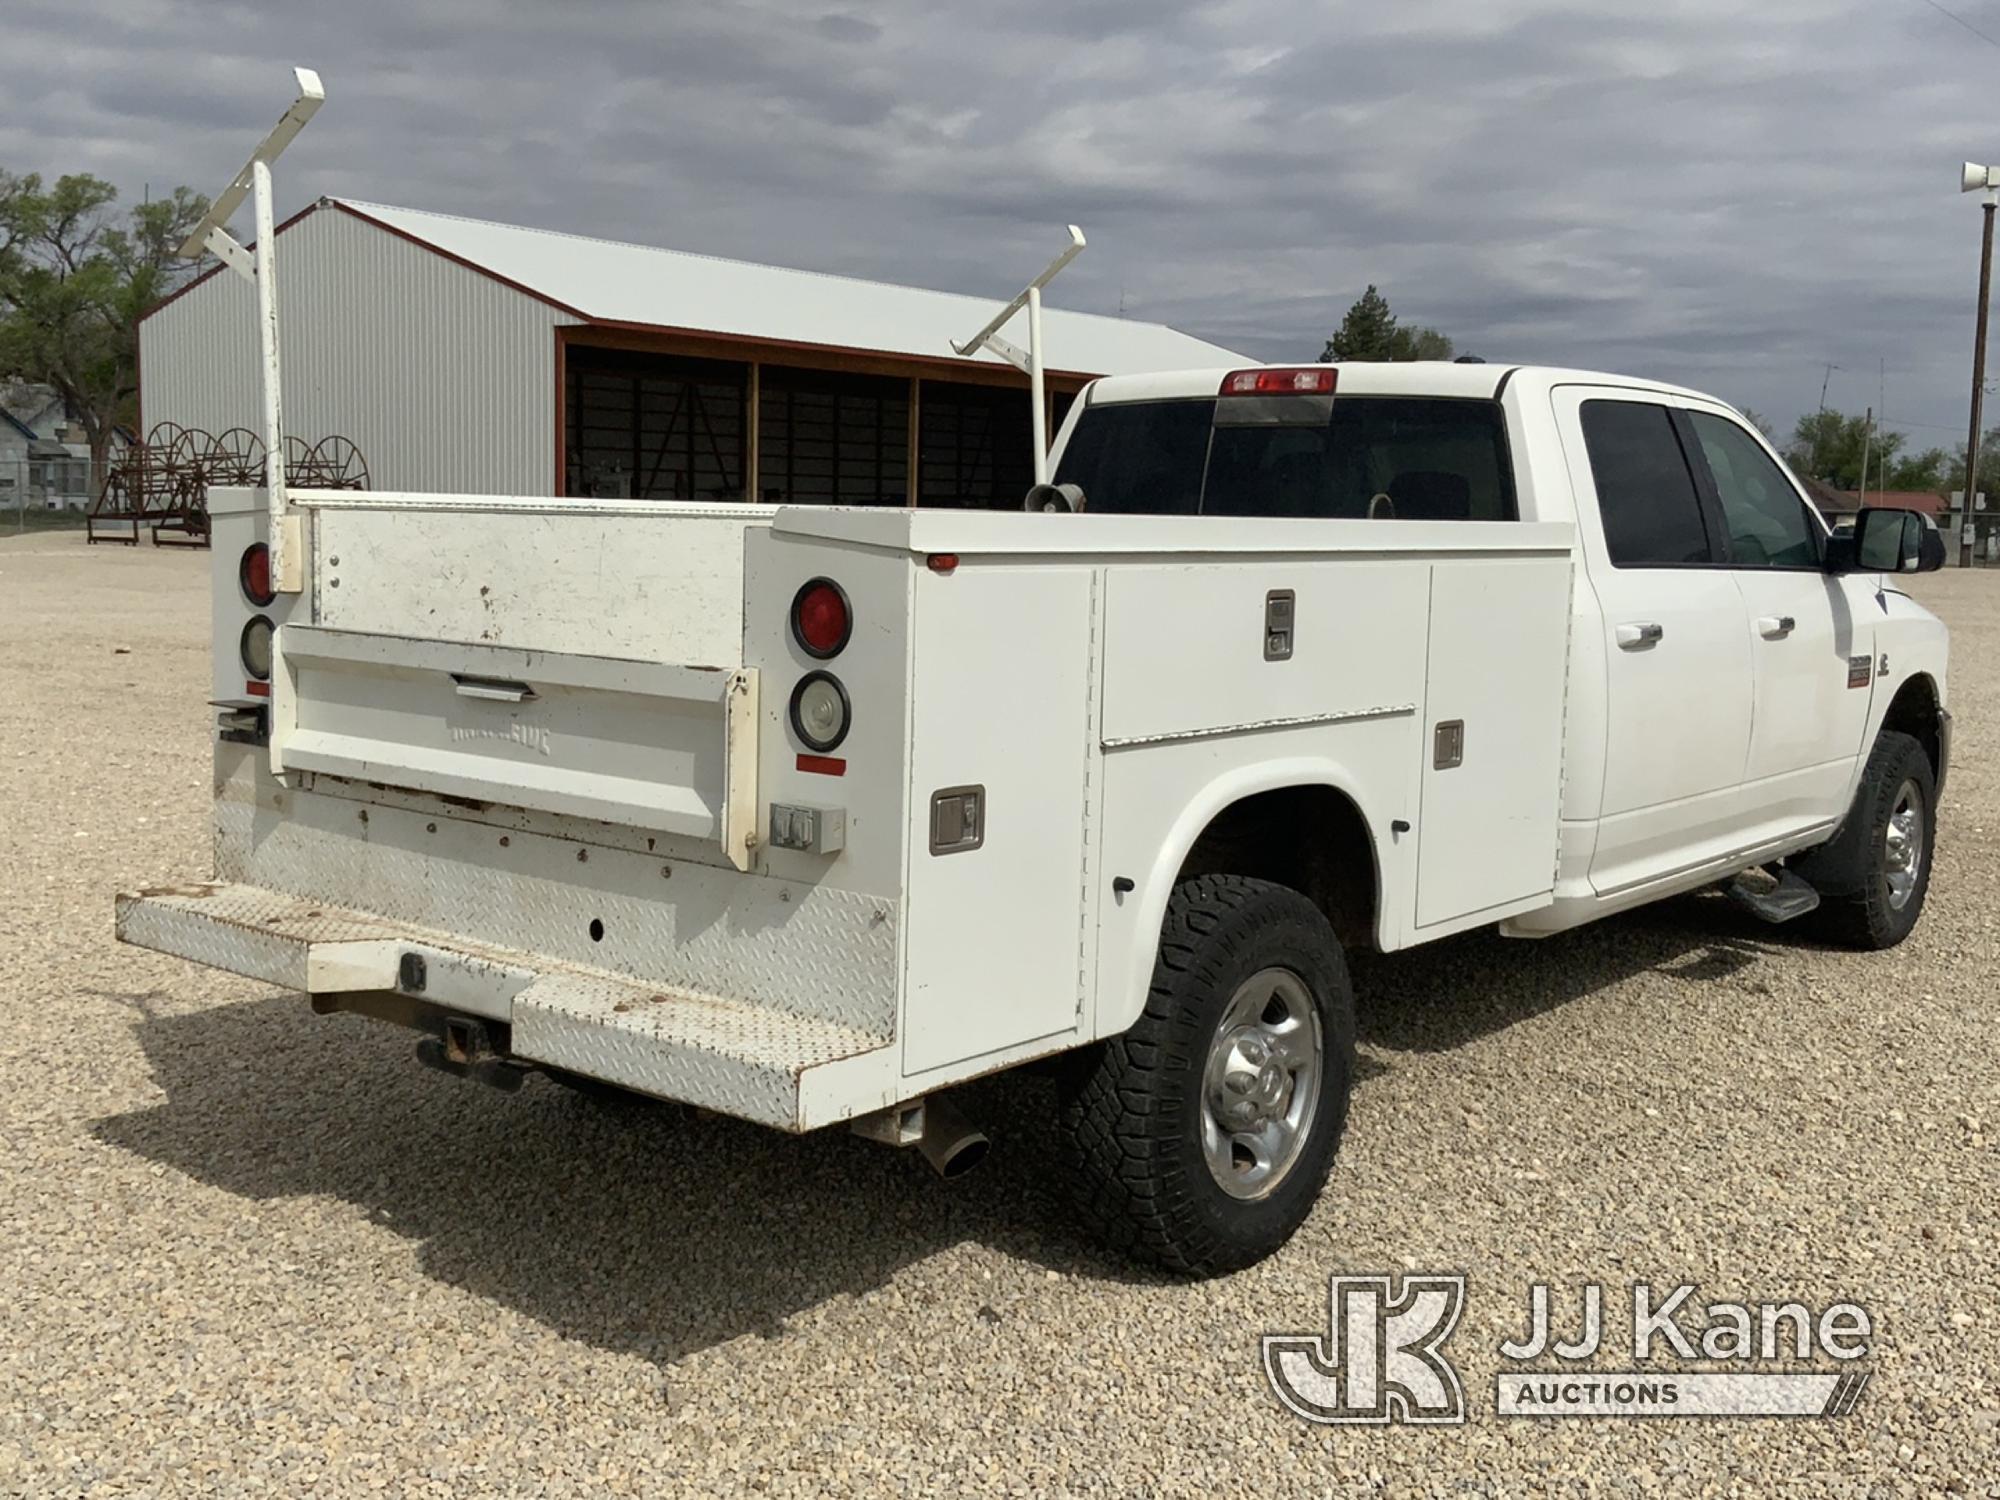 (Dighton, KS) 2010 RAM 3500 4x4 Crew-Cab Service Truck Runs and Moves) (Dealer Only, Components Have